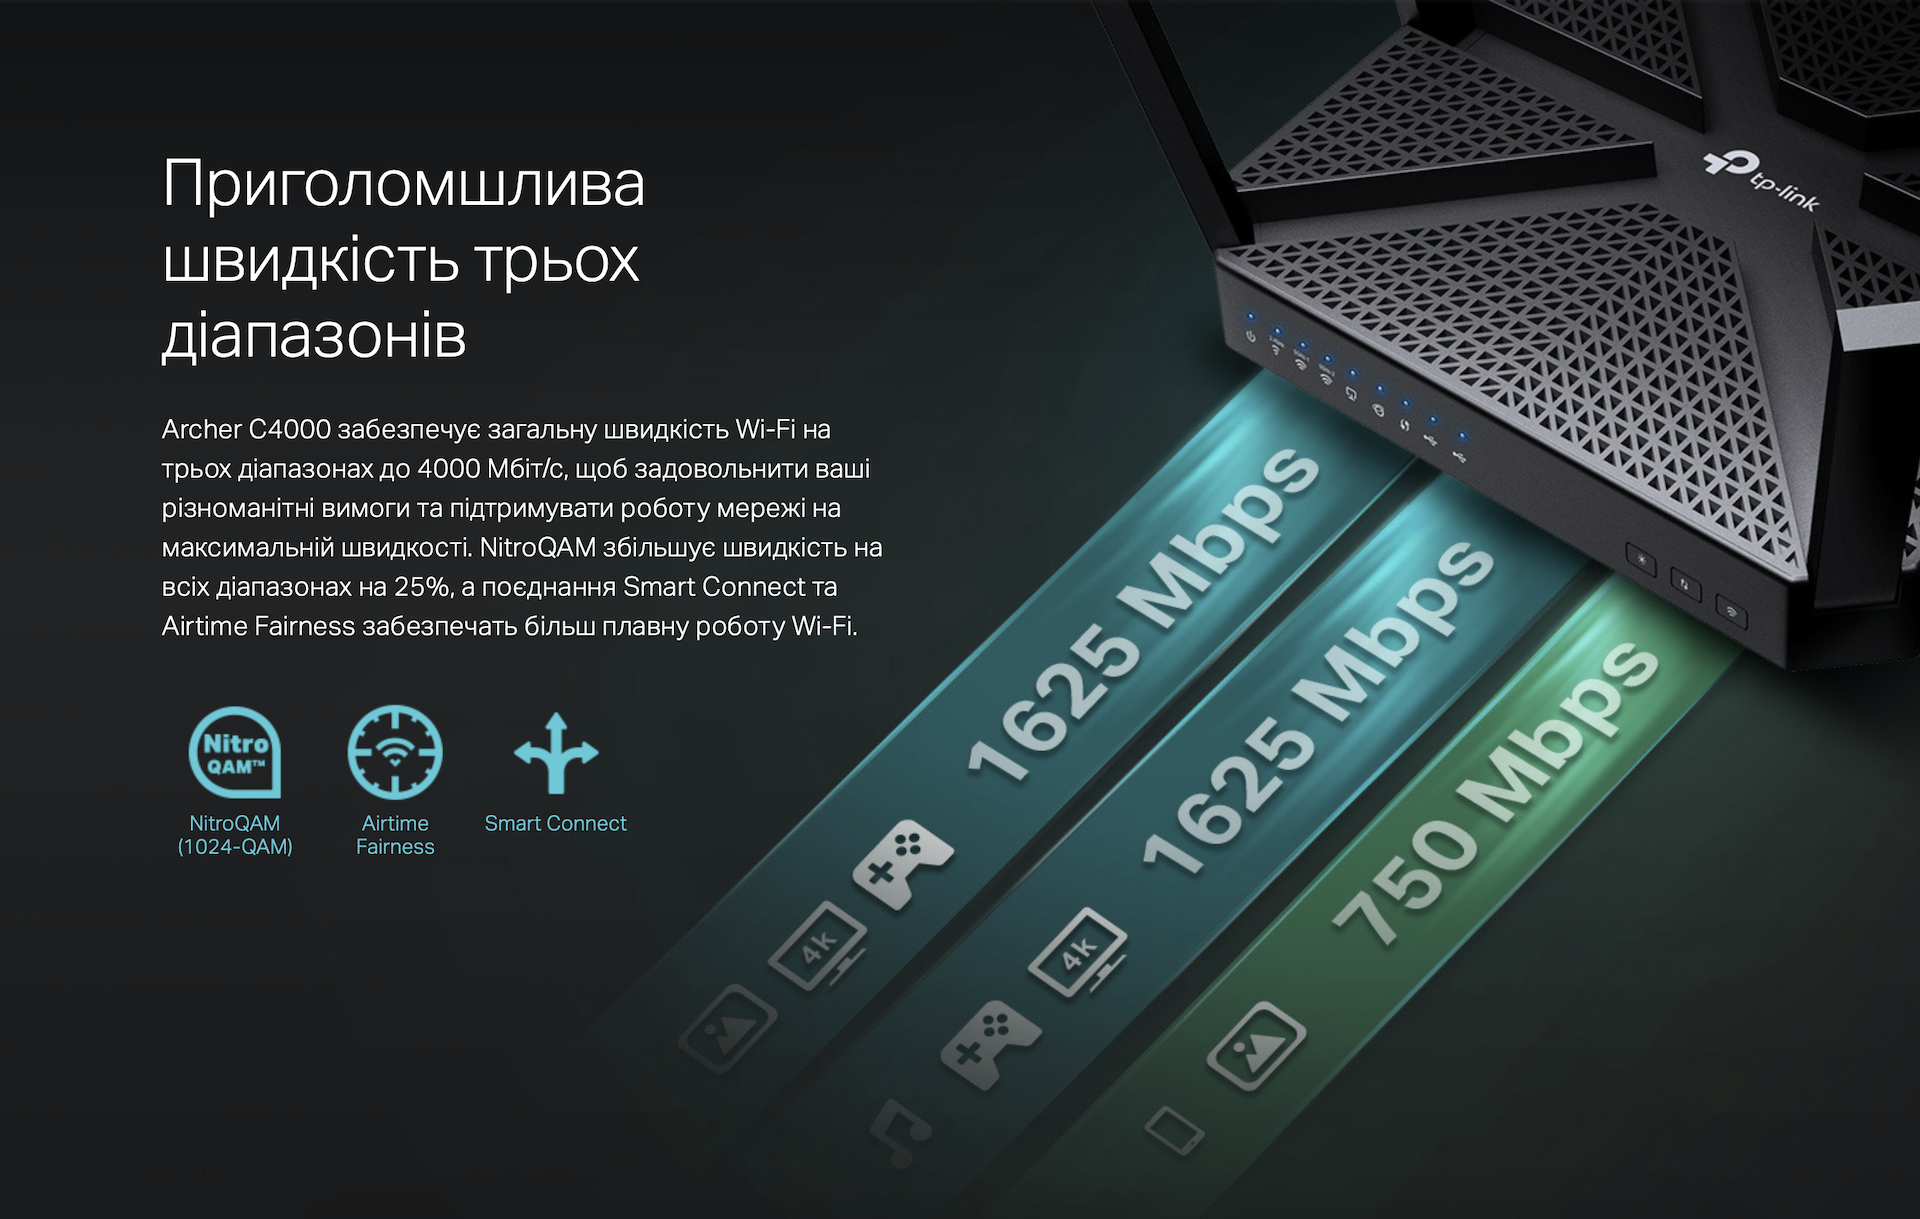 Overview of the TP-Link Archer C4000 router